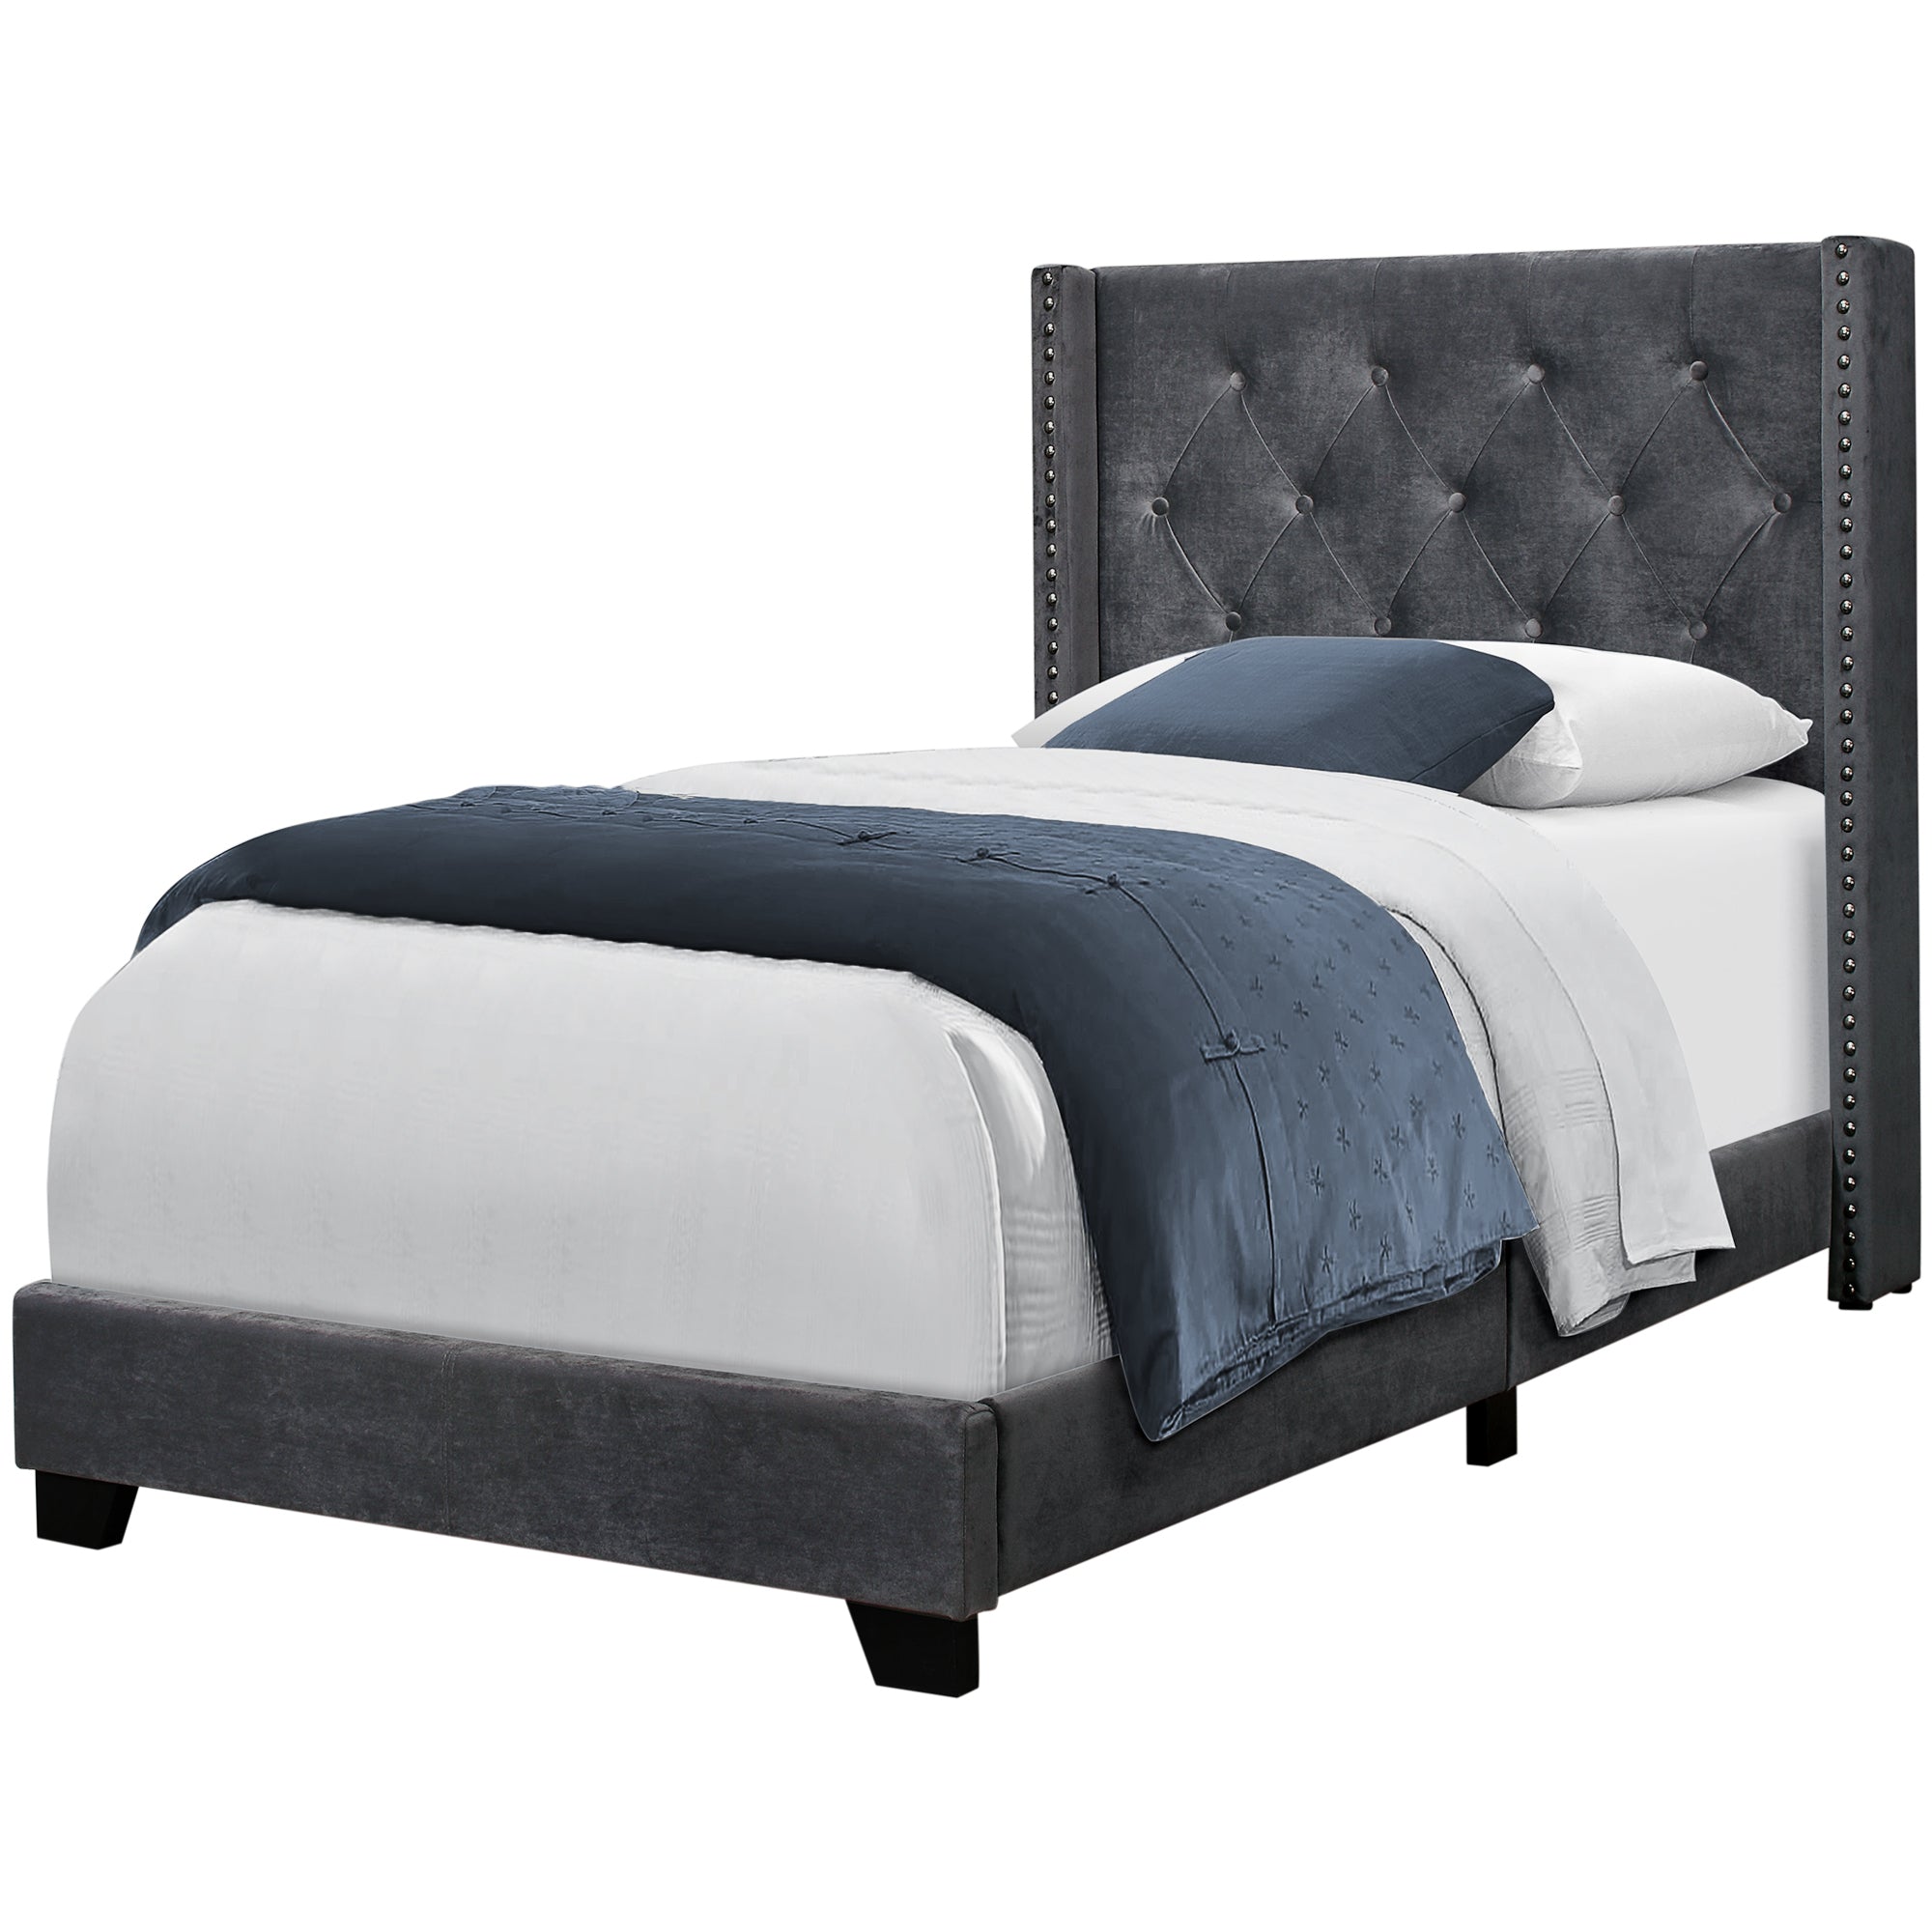 BED - TWIN SIZE / GREY LINEN WITH CHROME TRIM